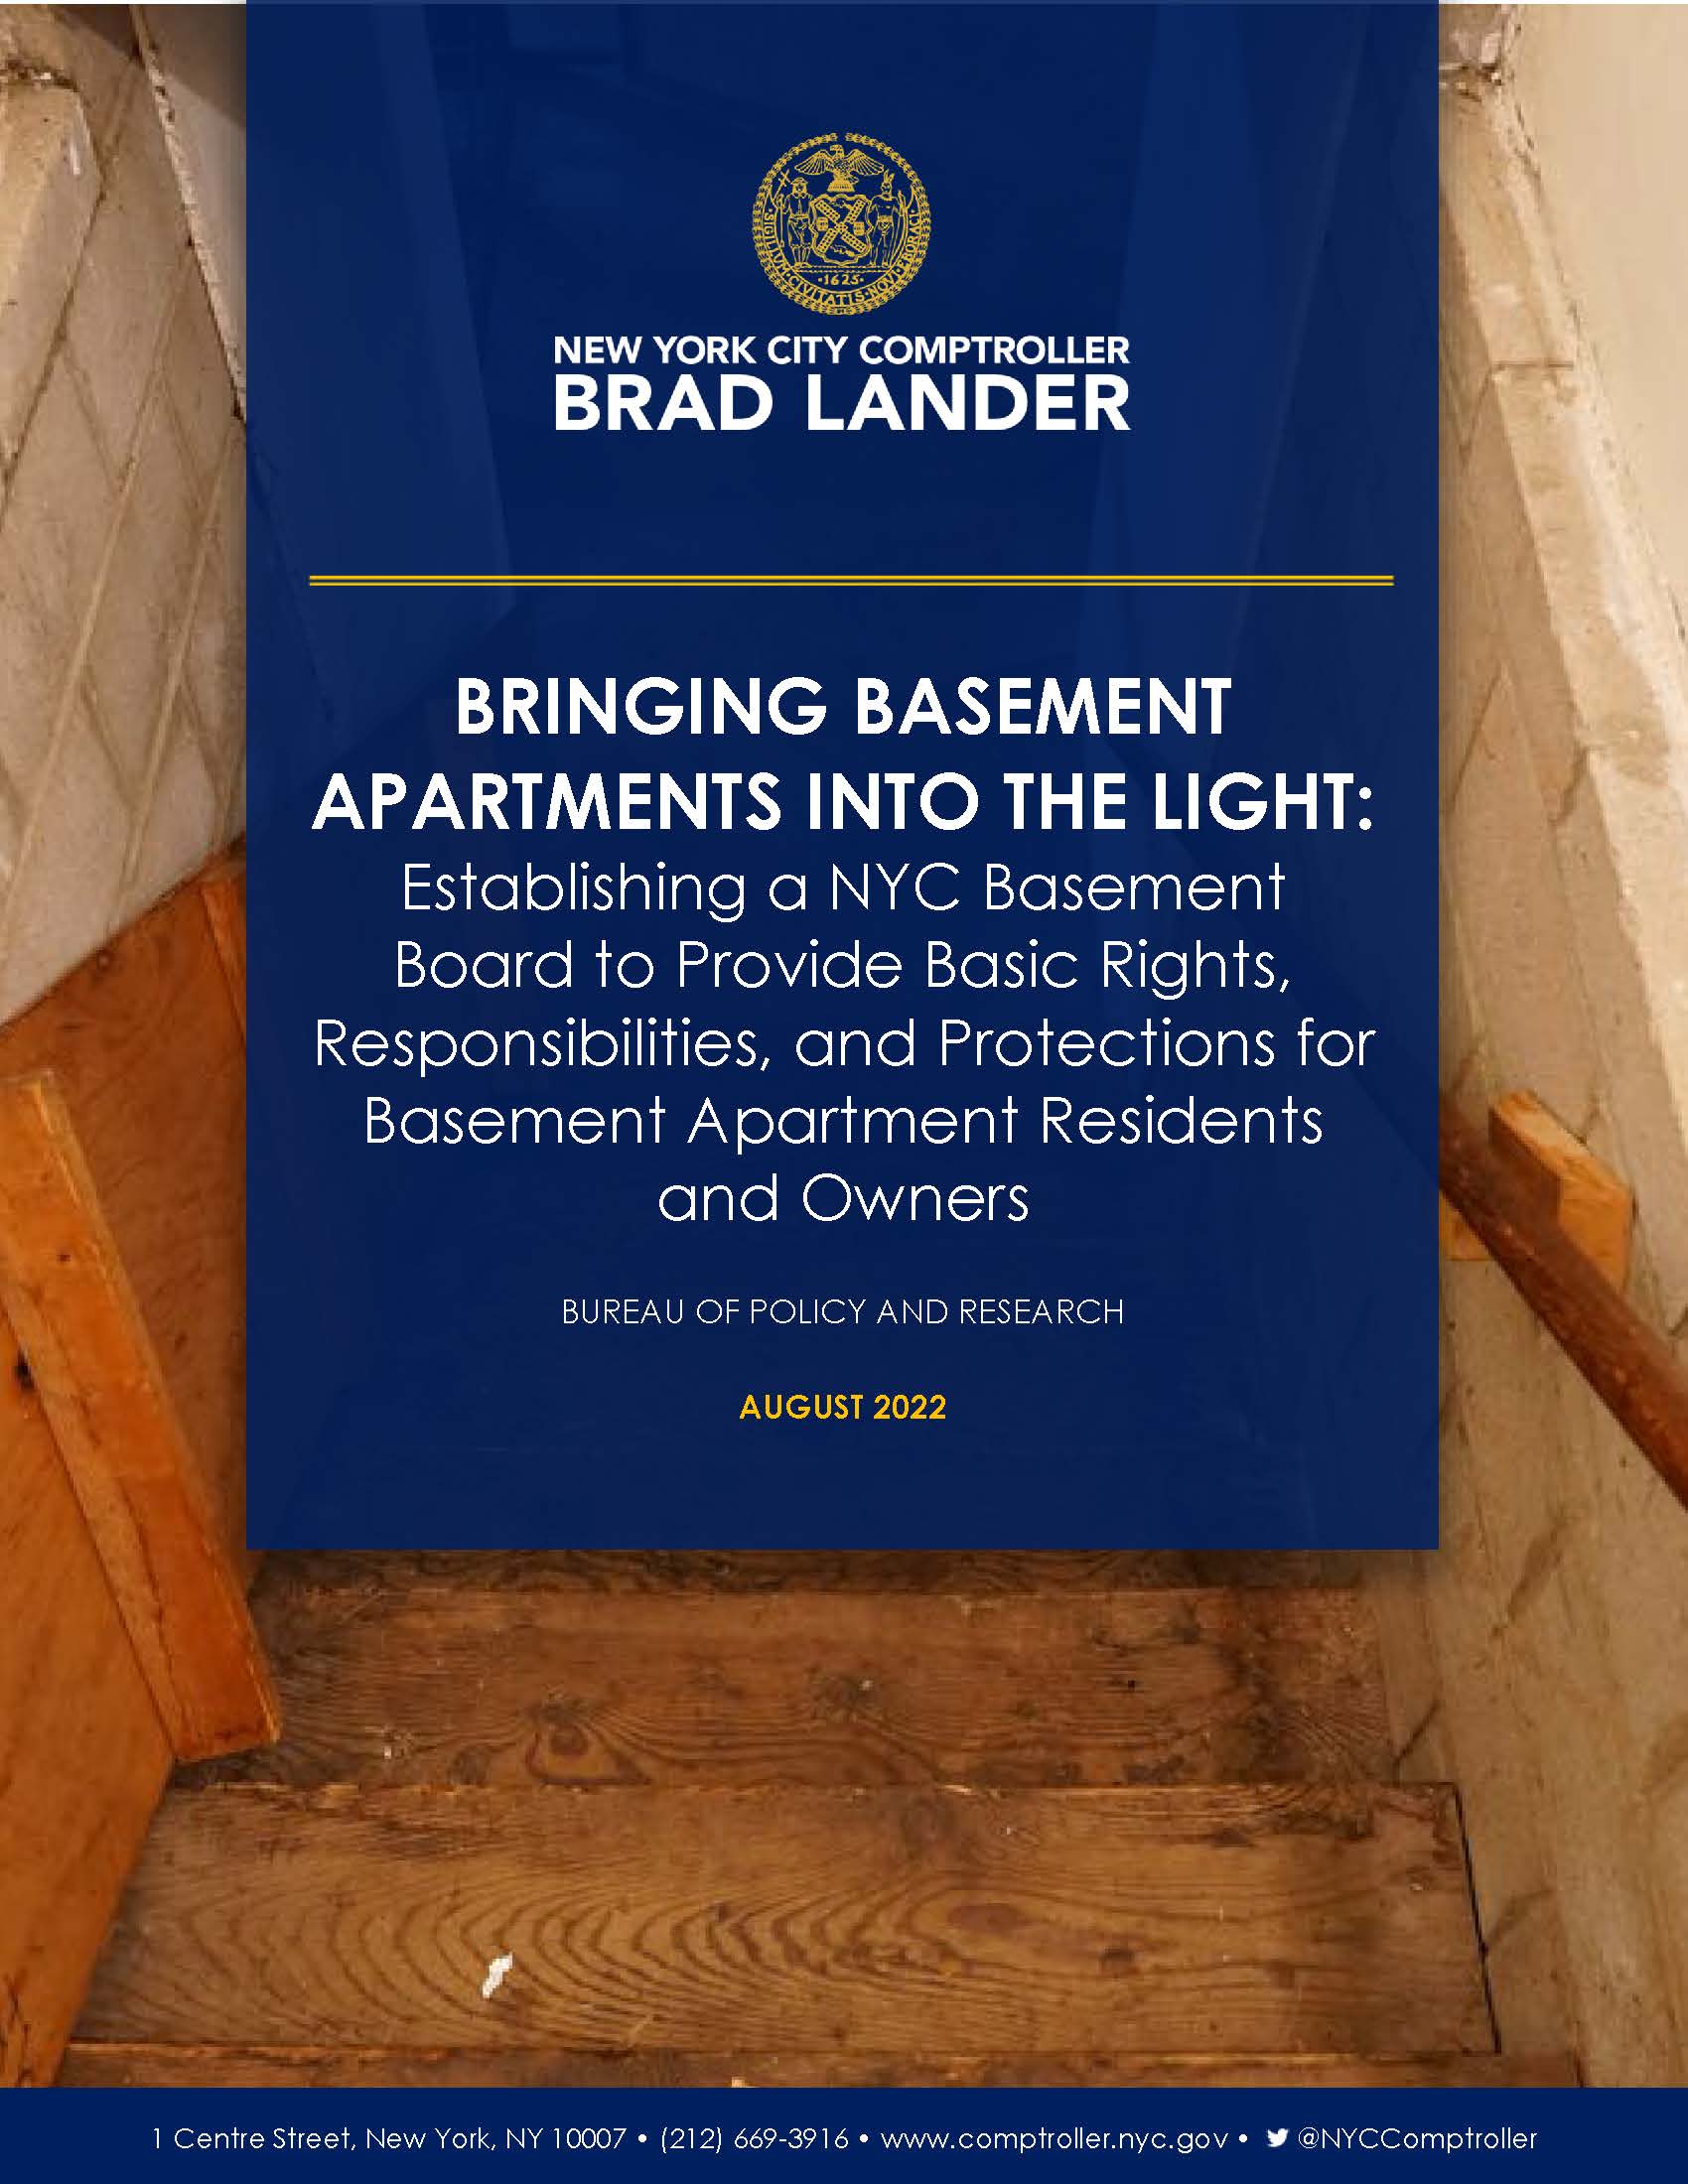 New Rep Bengali Xxx Hd Full Video - Bringing Basement Apartments Into the Light : Office of the New York City  Comptroller Brad Lander